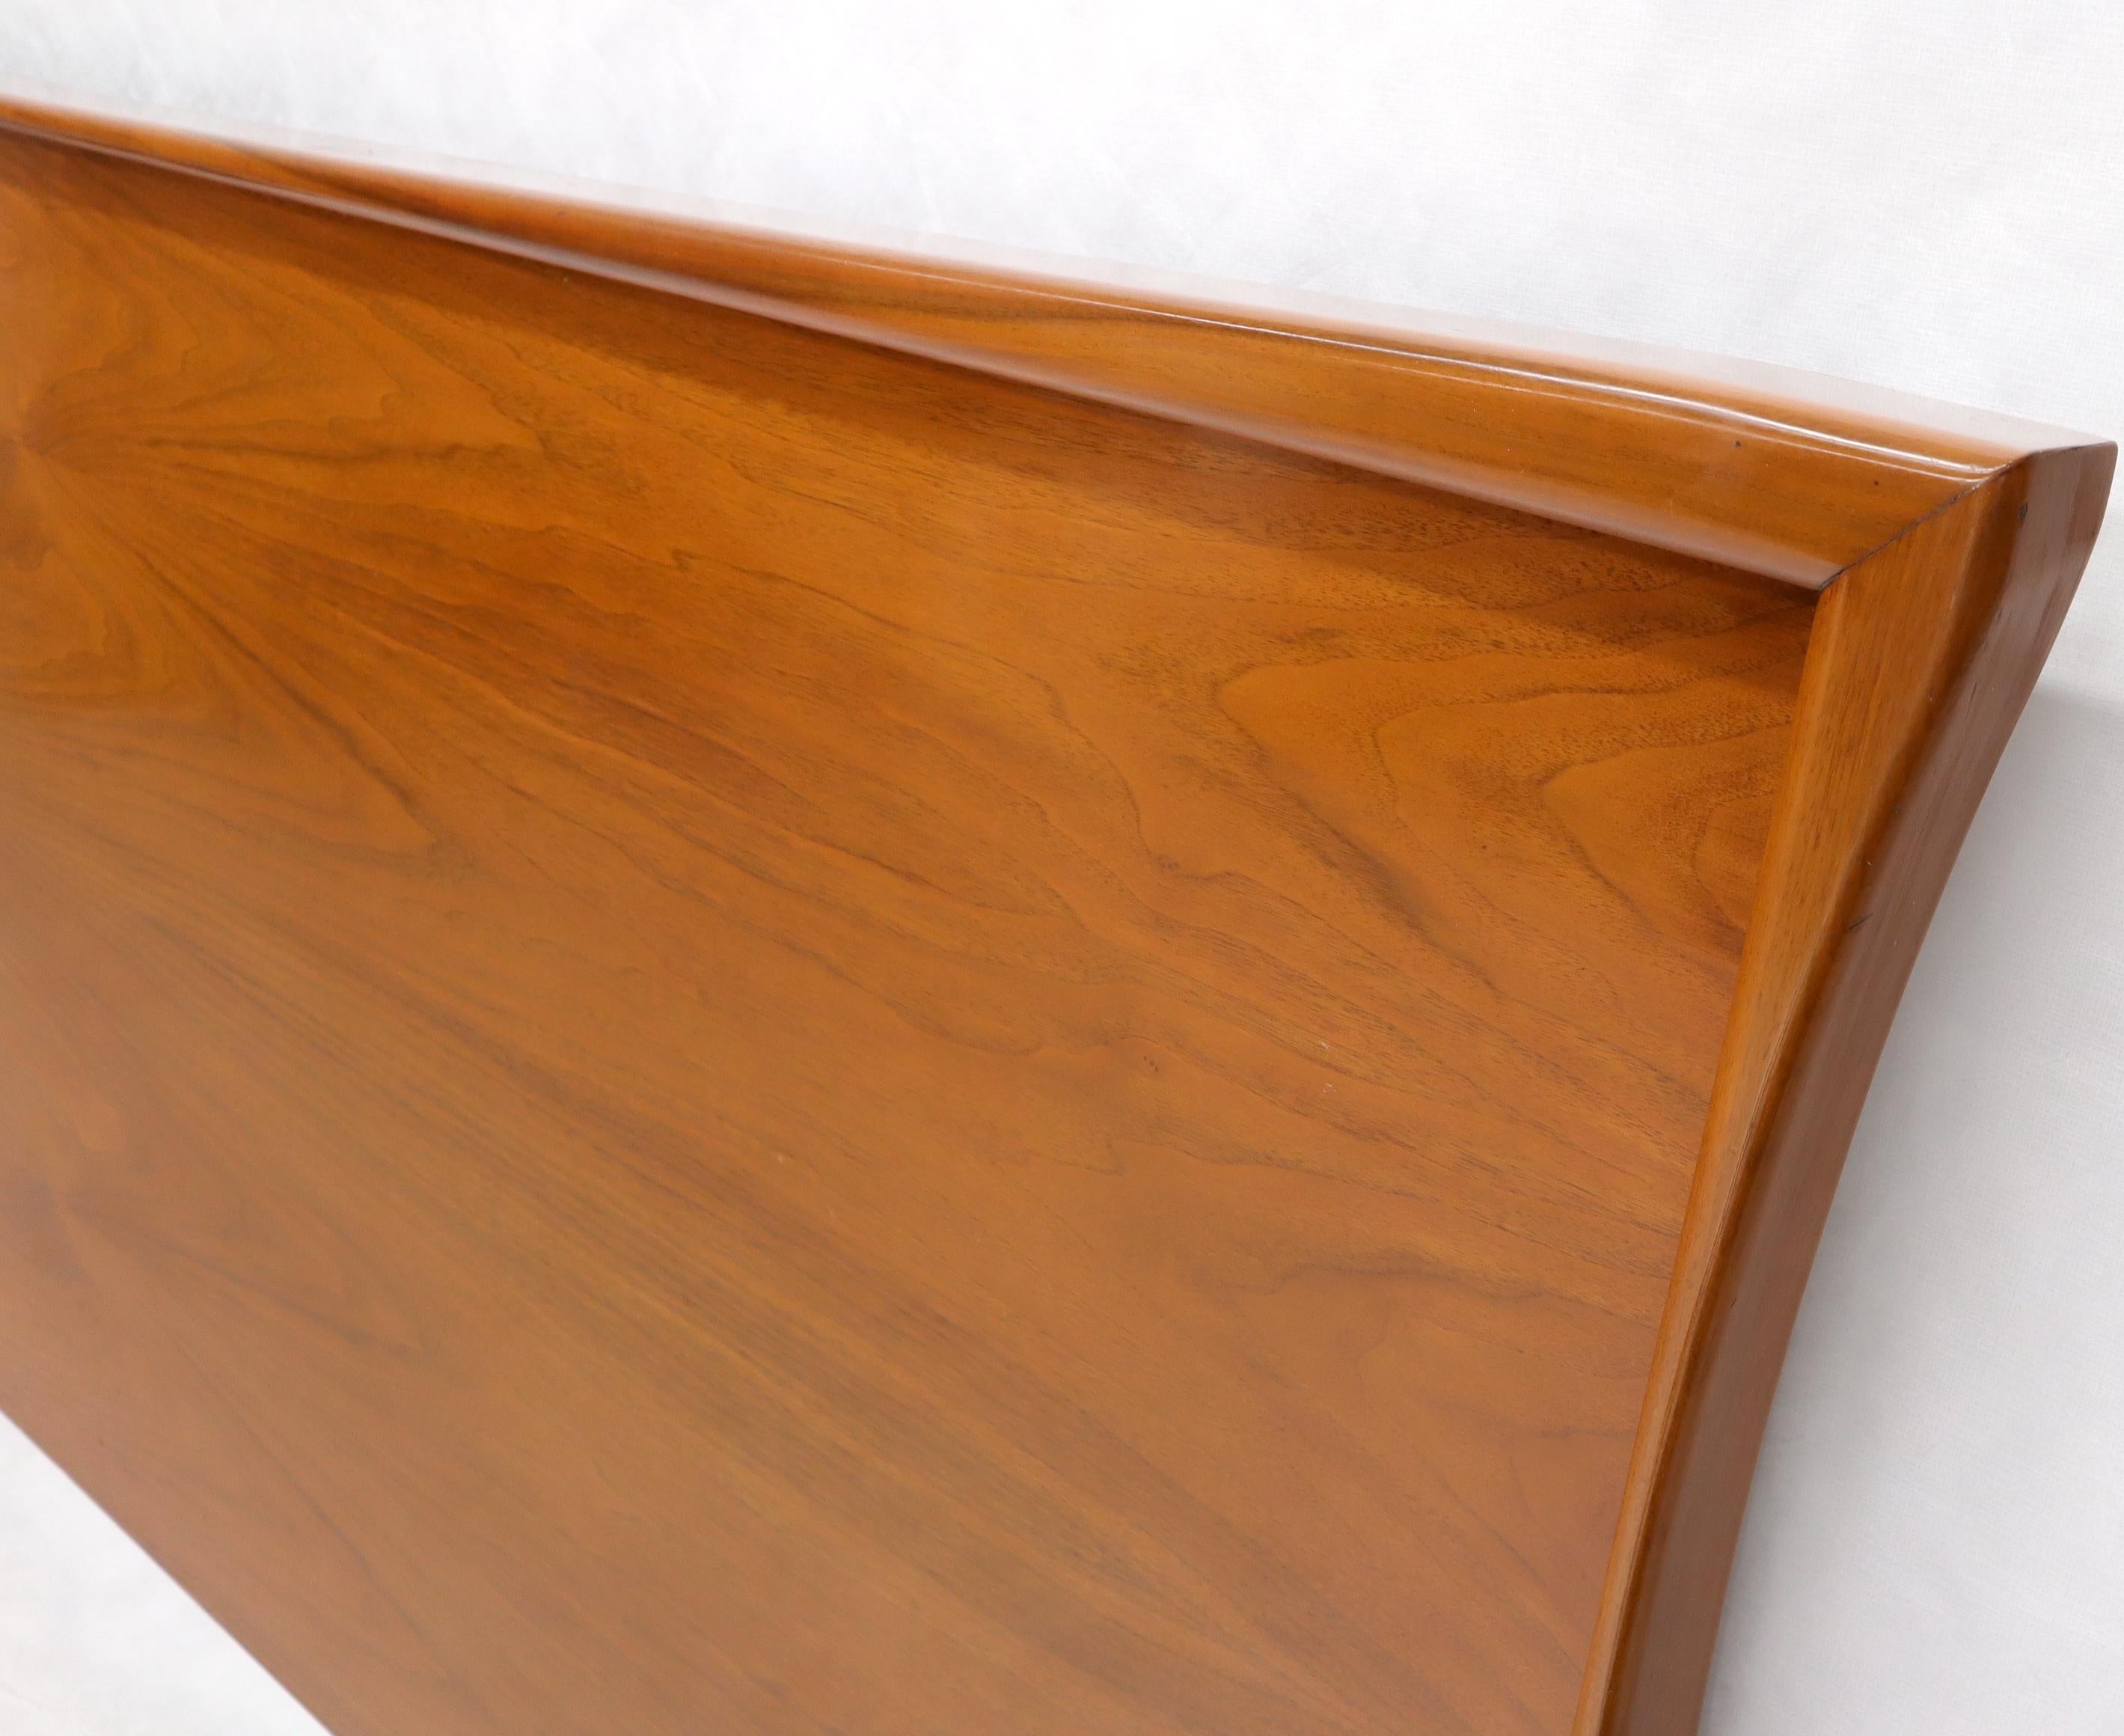 20th Century Large Sculptural Light Mid-Century Modern Walnut King Size Headboard Bed For Sale